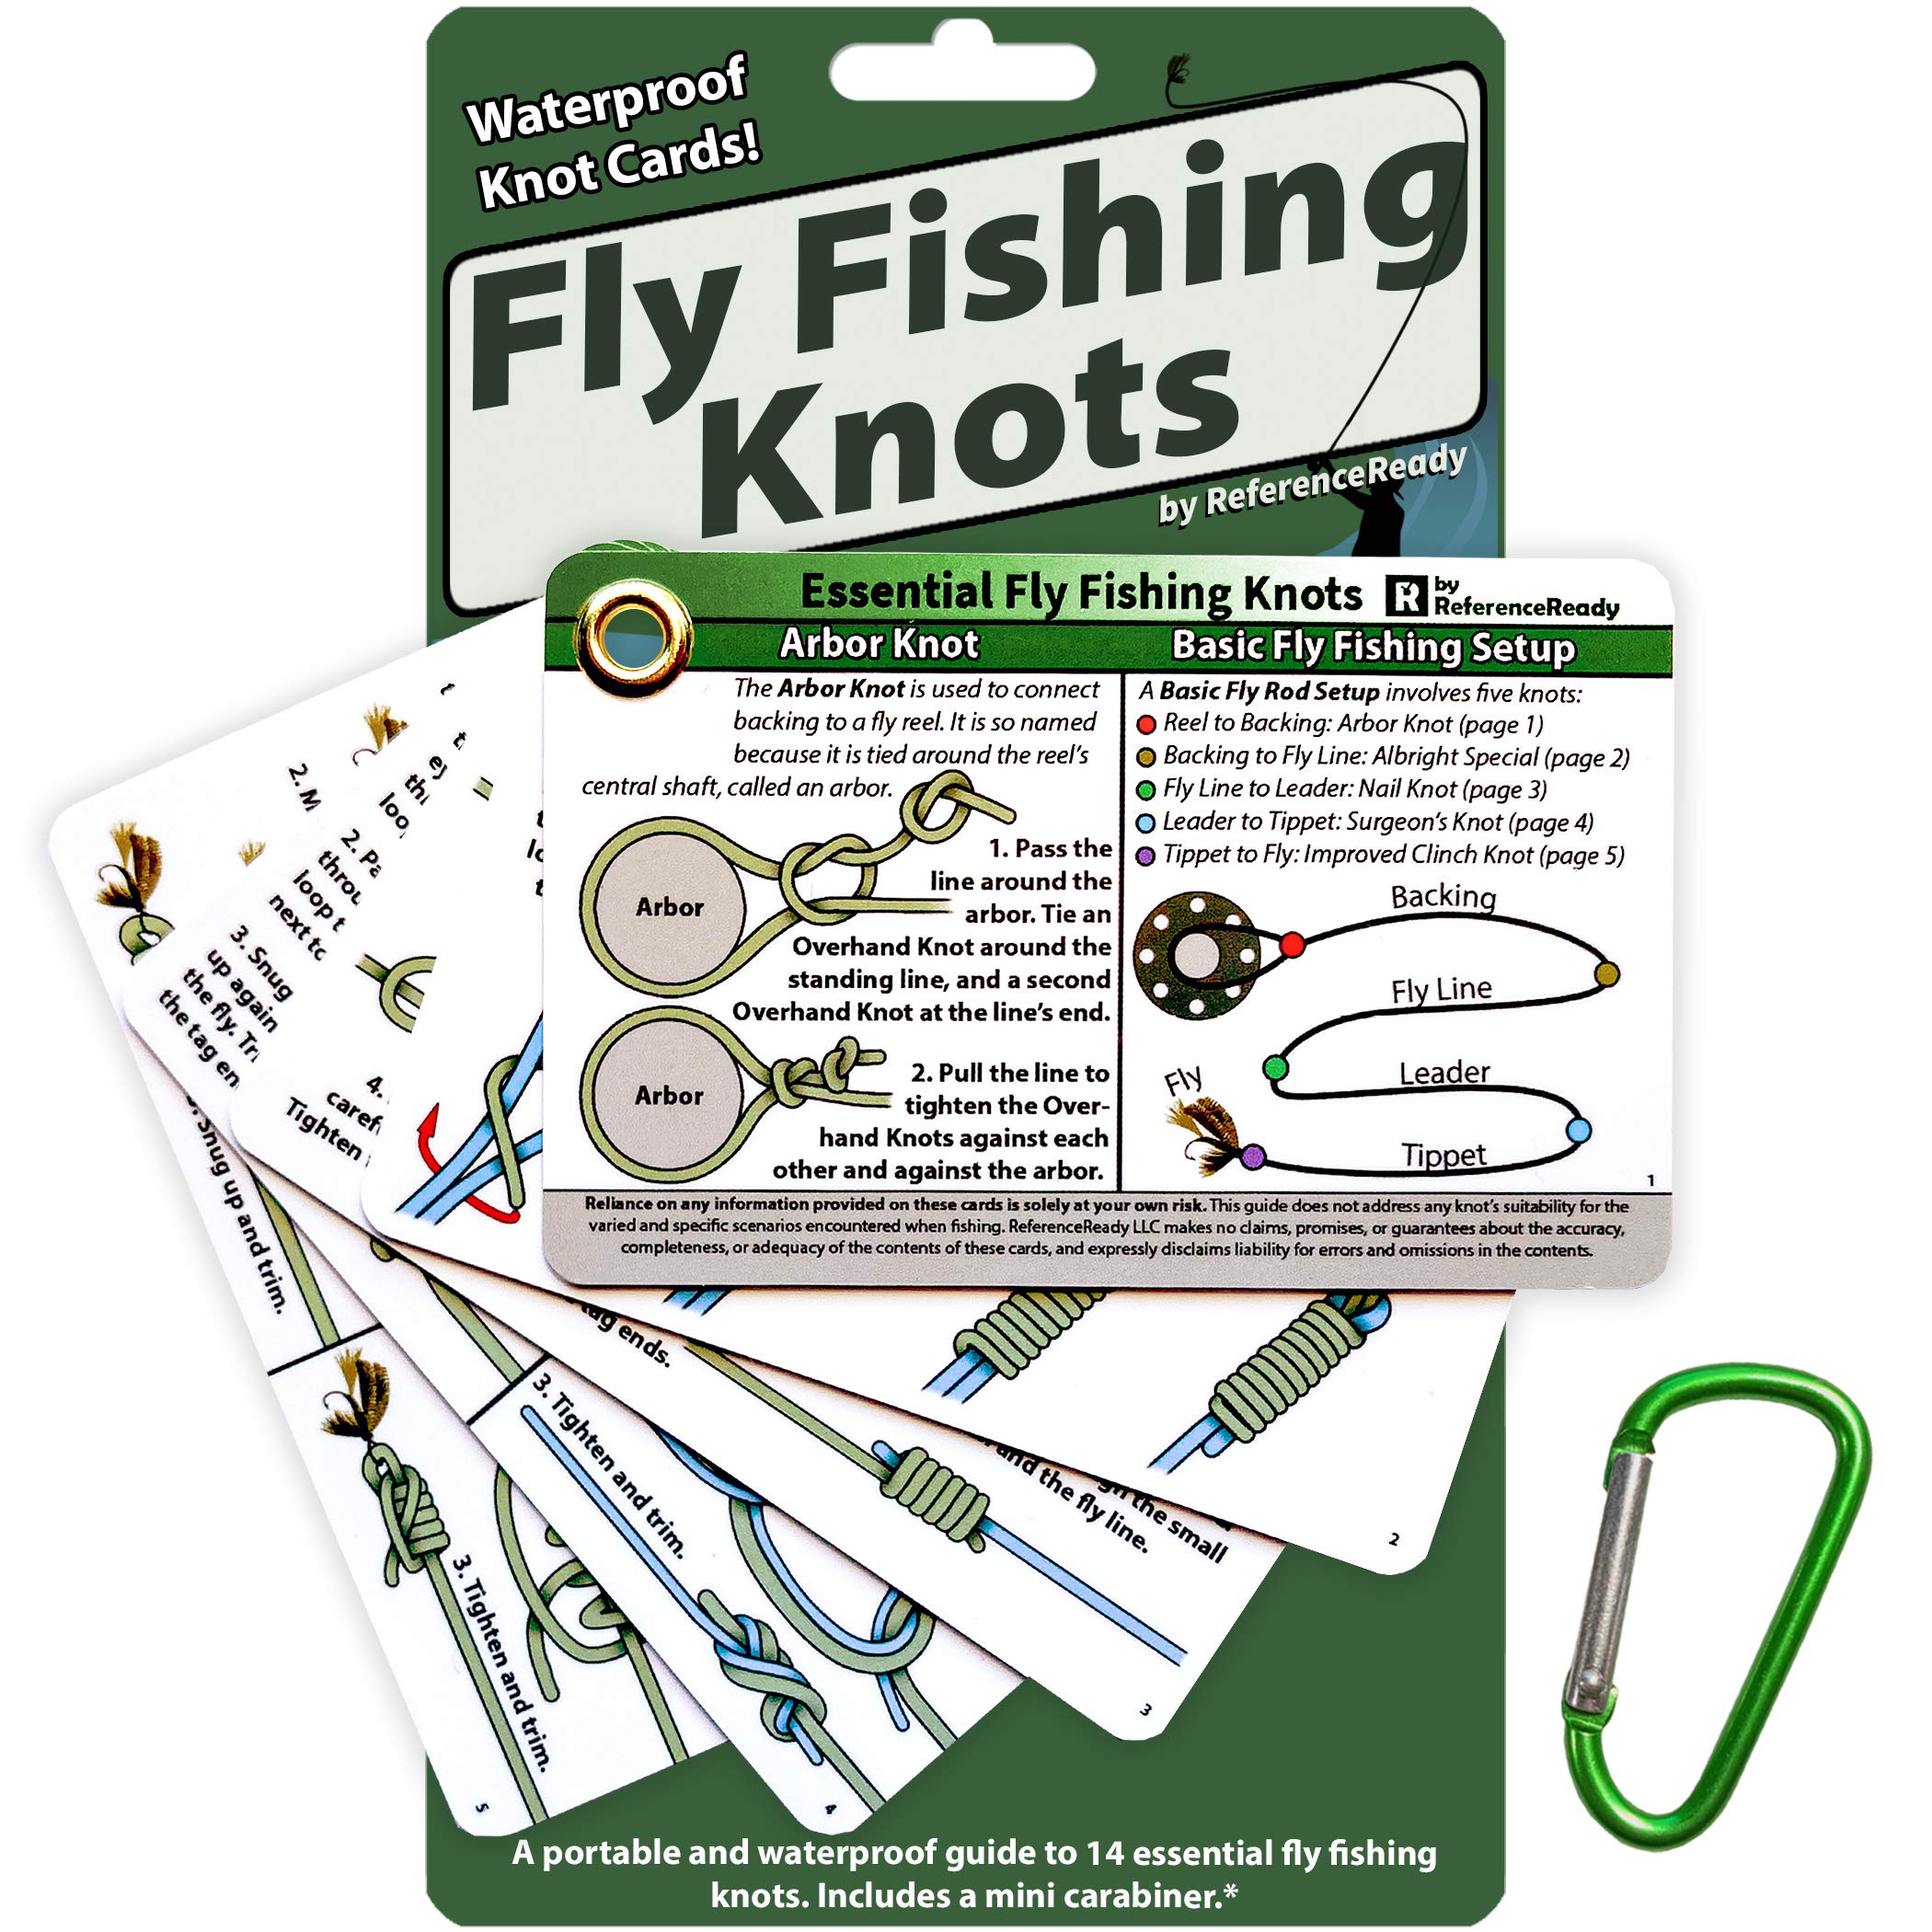 ReferenceReady Fly Fishing Knot Cards - Waterproof Guide to 14